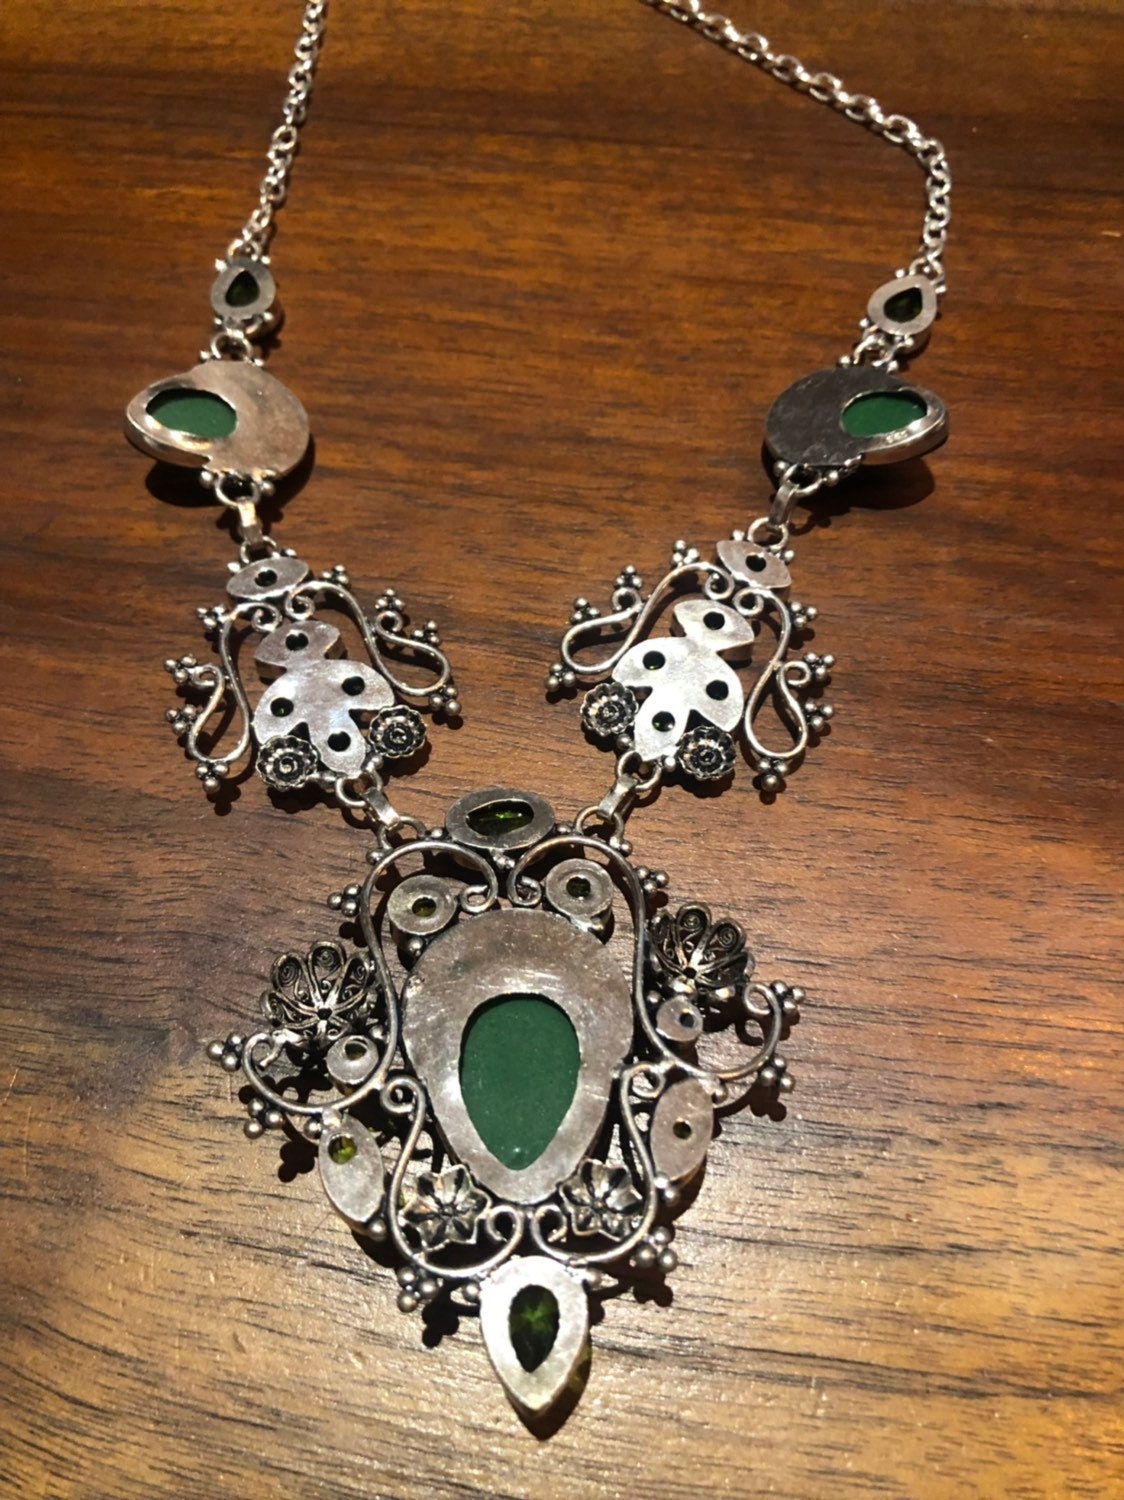 Green Handmade Gothic Styled Silver Finished Genuine Faceted Antique Volcanic Glass Choker Necklace